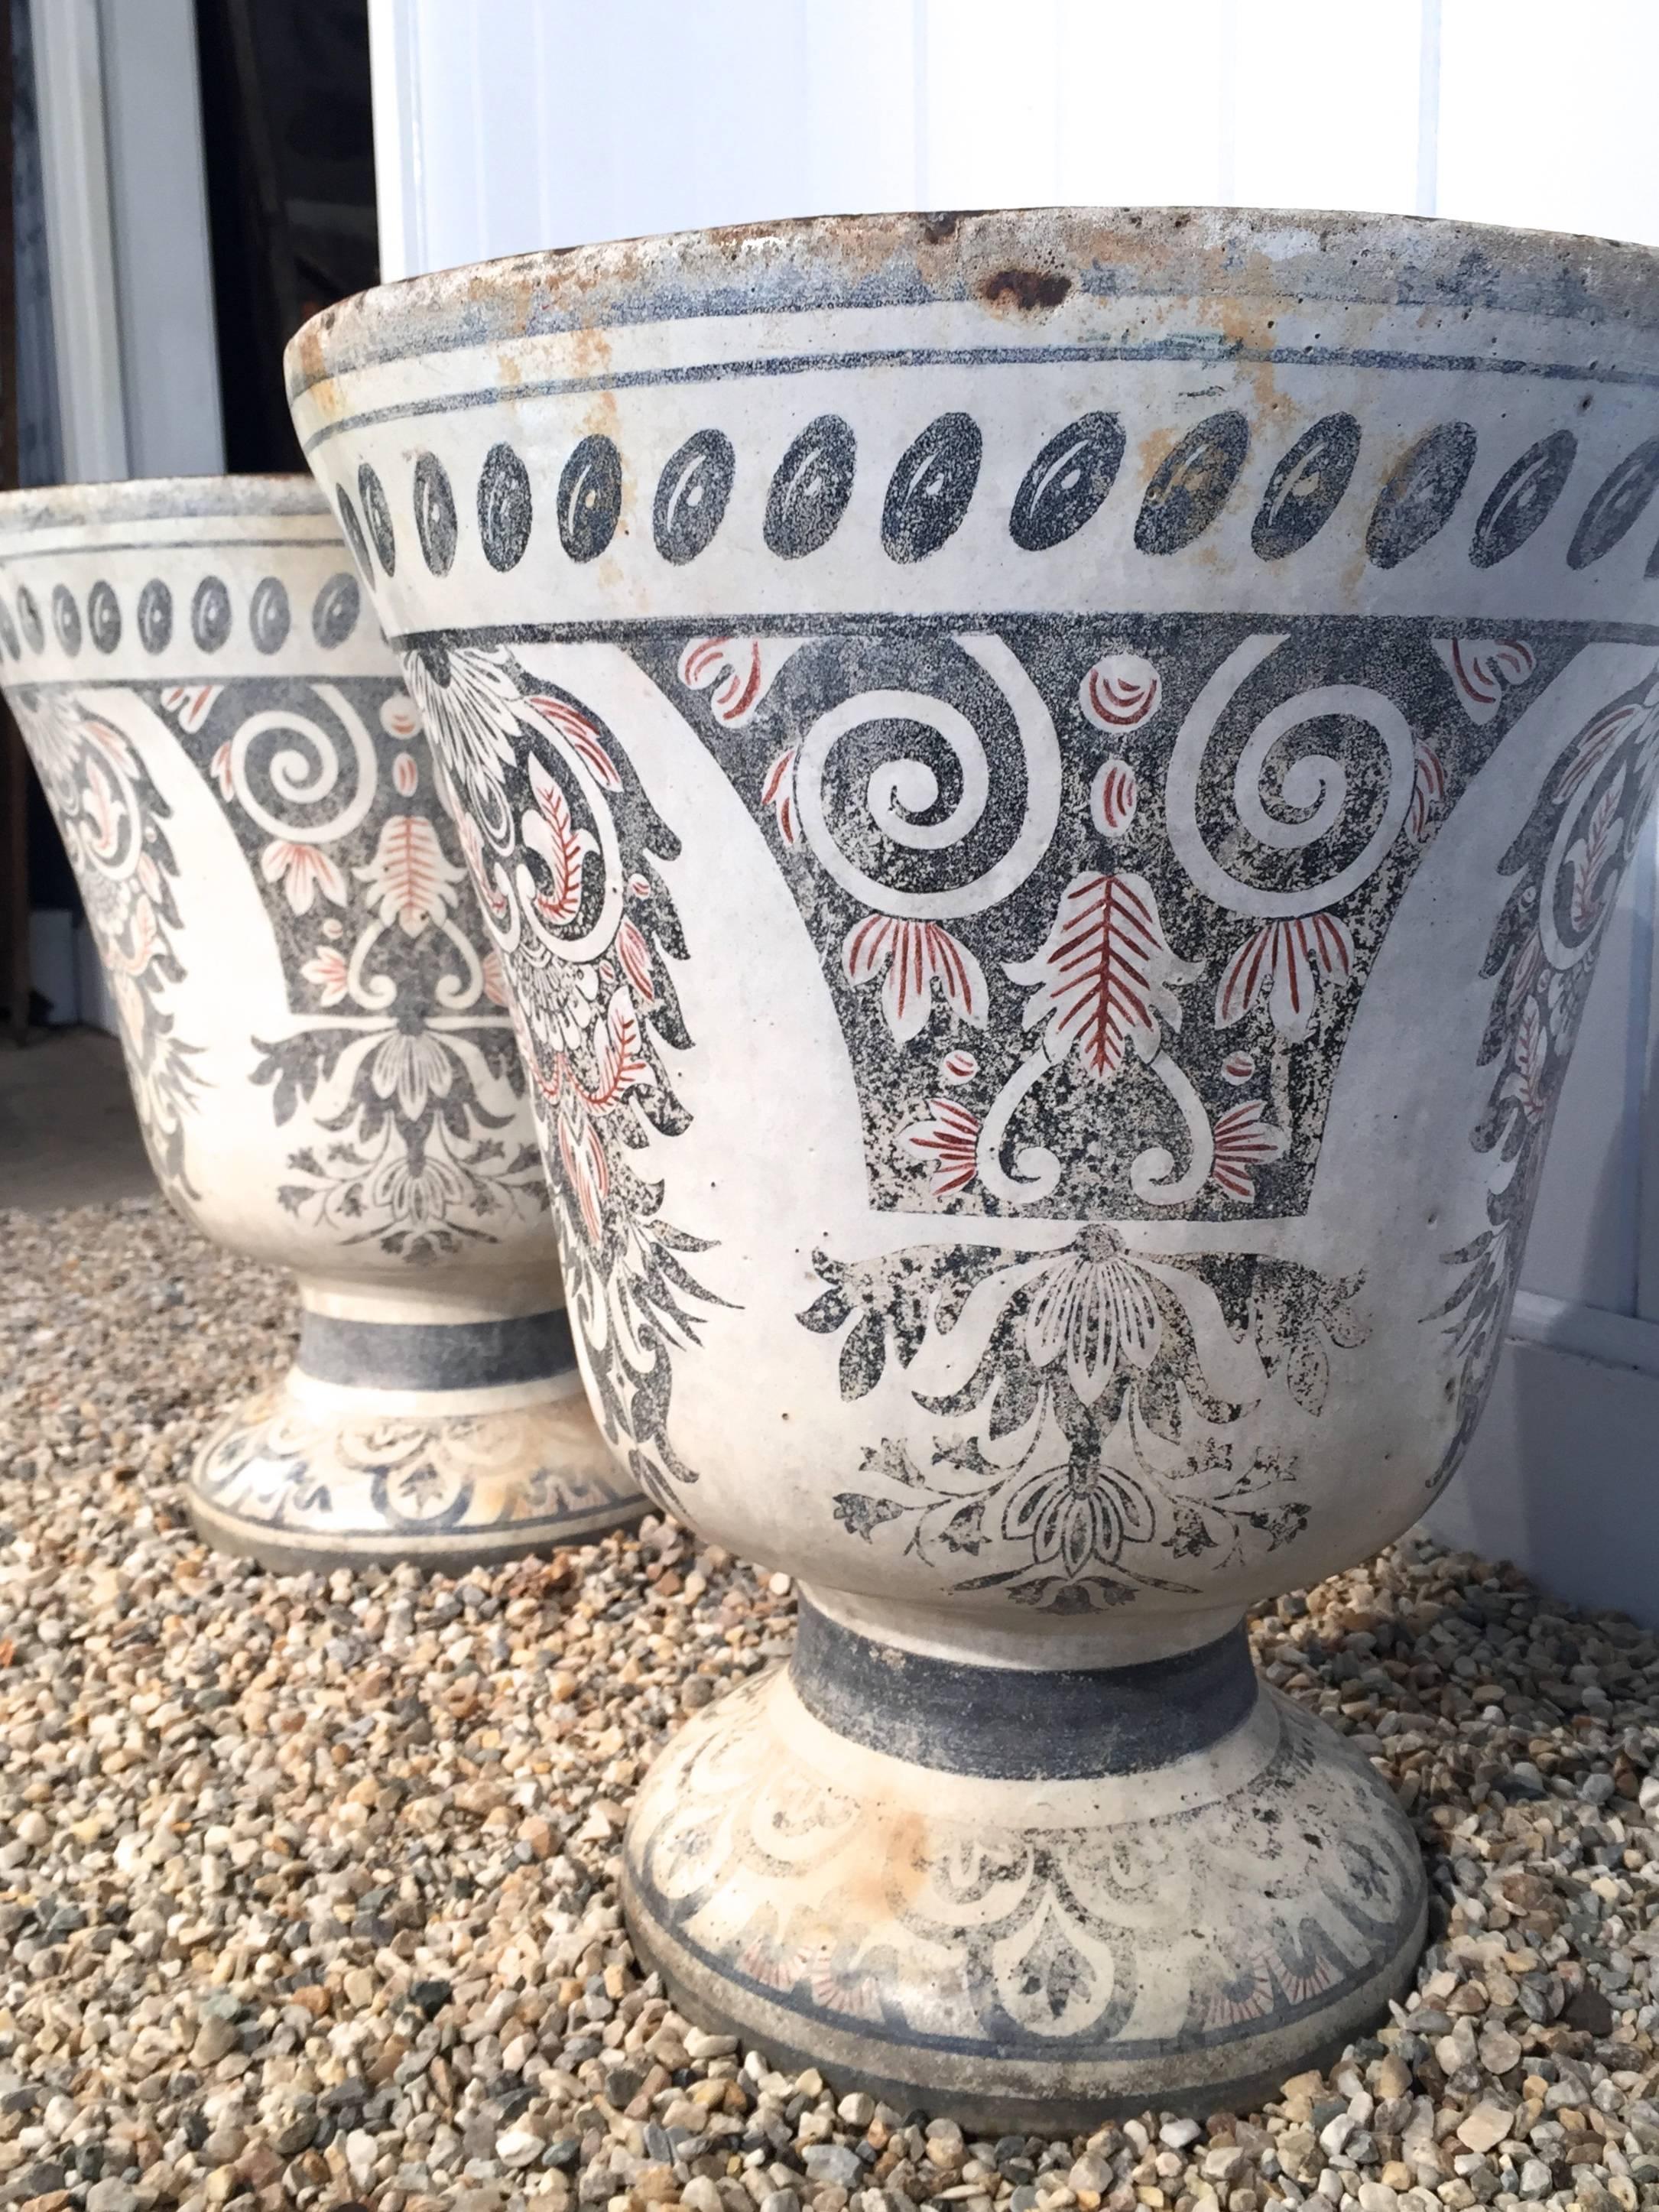 Acquired from the personal collection of Oprah Winfrey's home in Montecito, California, this rare pair of cast iron enameled Rouen vases or urns is signed E. Paris et Cie, Rue de Paradis and dates circa 1870. Fabulous condition and guaranteed